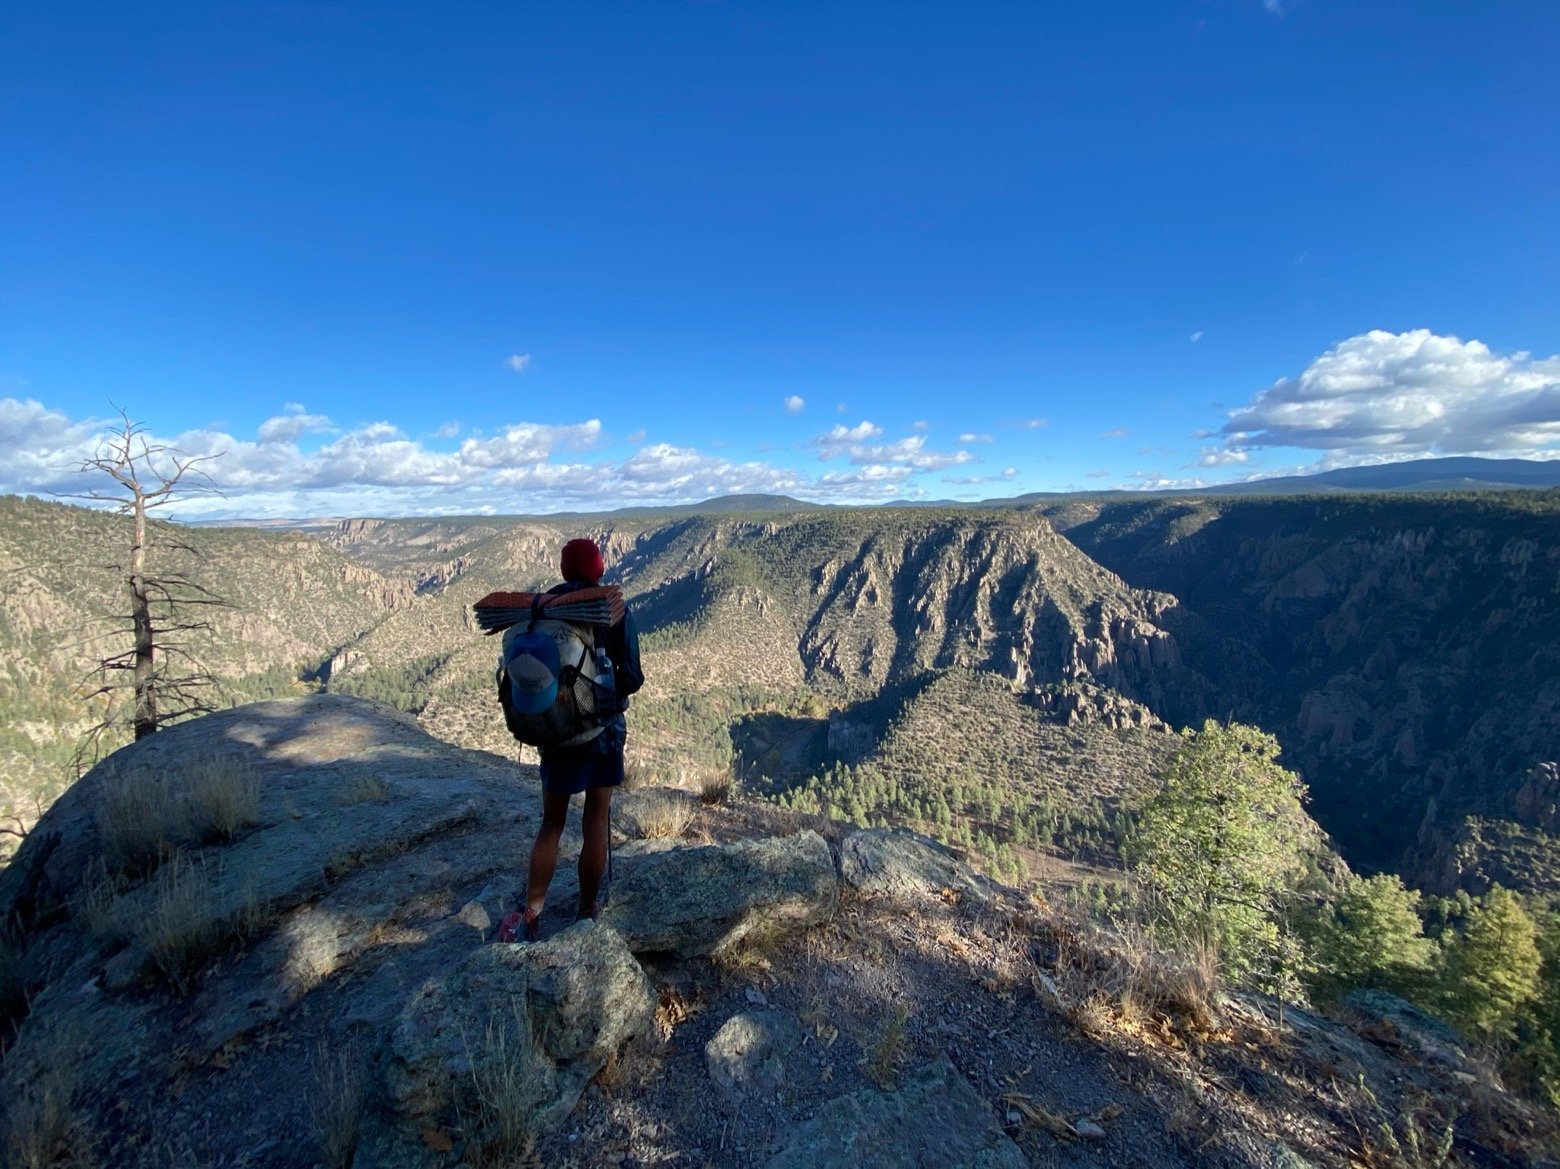 Staring into the Gila River Wilderness